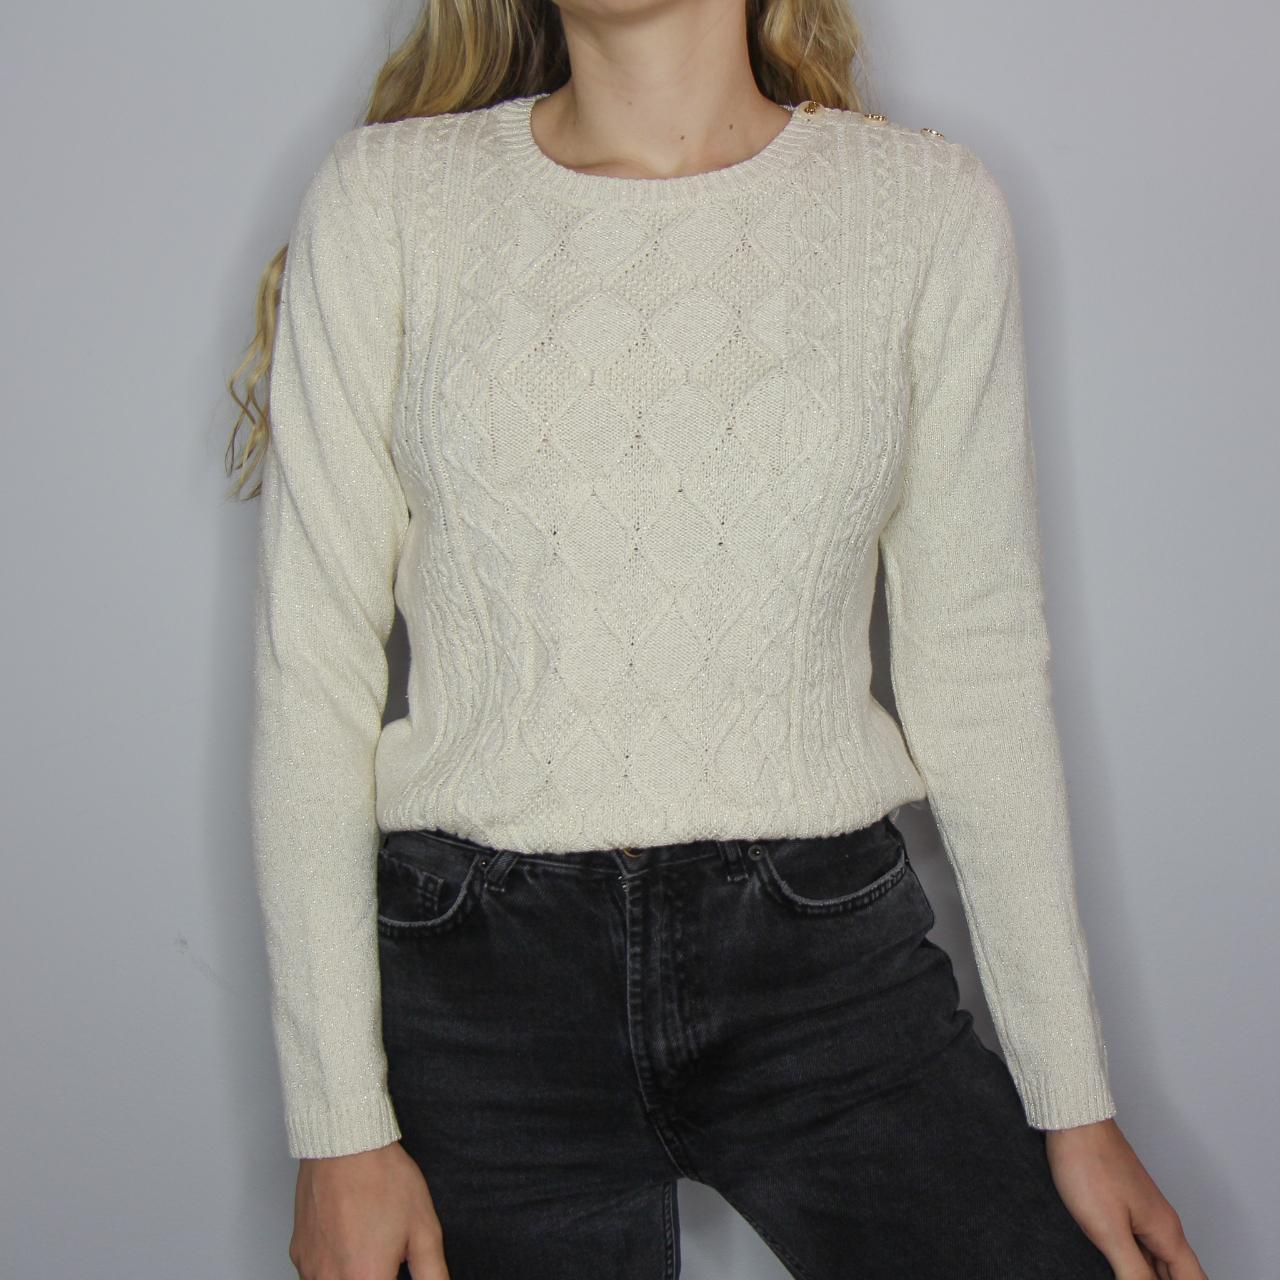 Product Image 1 - cream knit sweater with gold